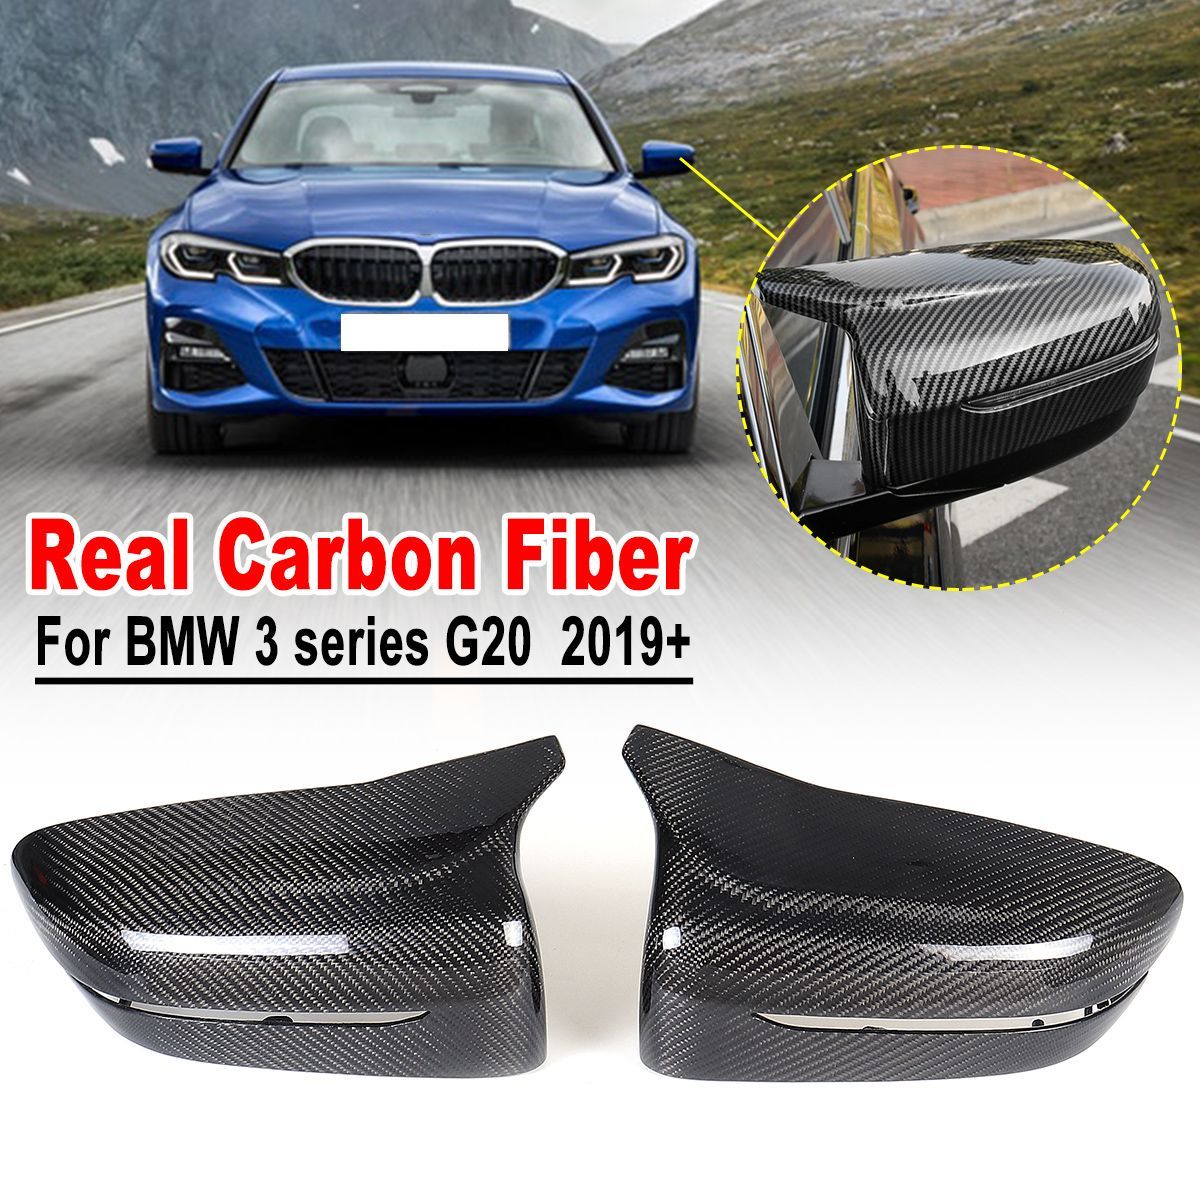 Pair-Real-Carbon-Fiber-Side-Rear-View-Mirror-Covers-LHD-For-BMW-G20-3-Series-2019-M-Look-1628388